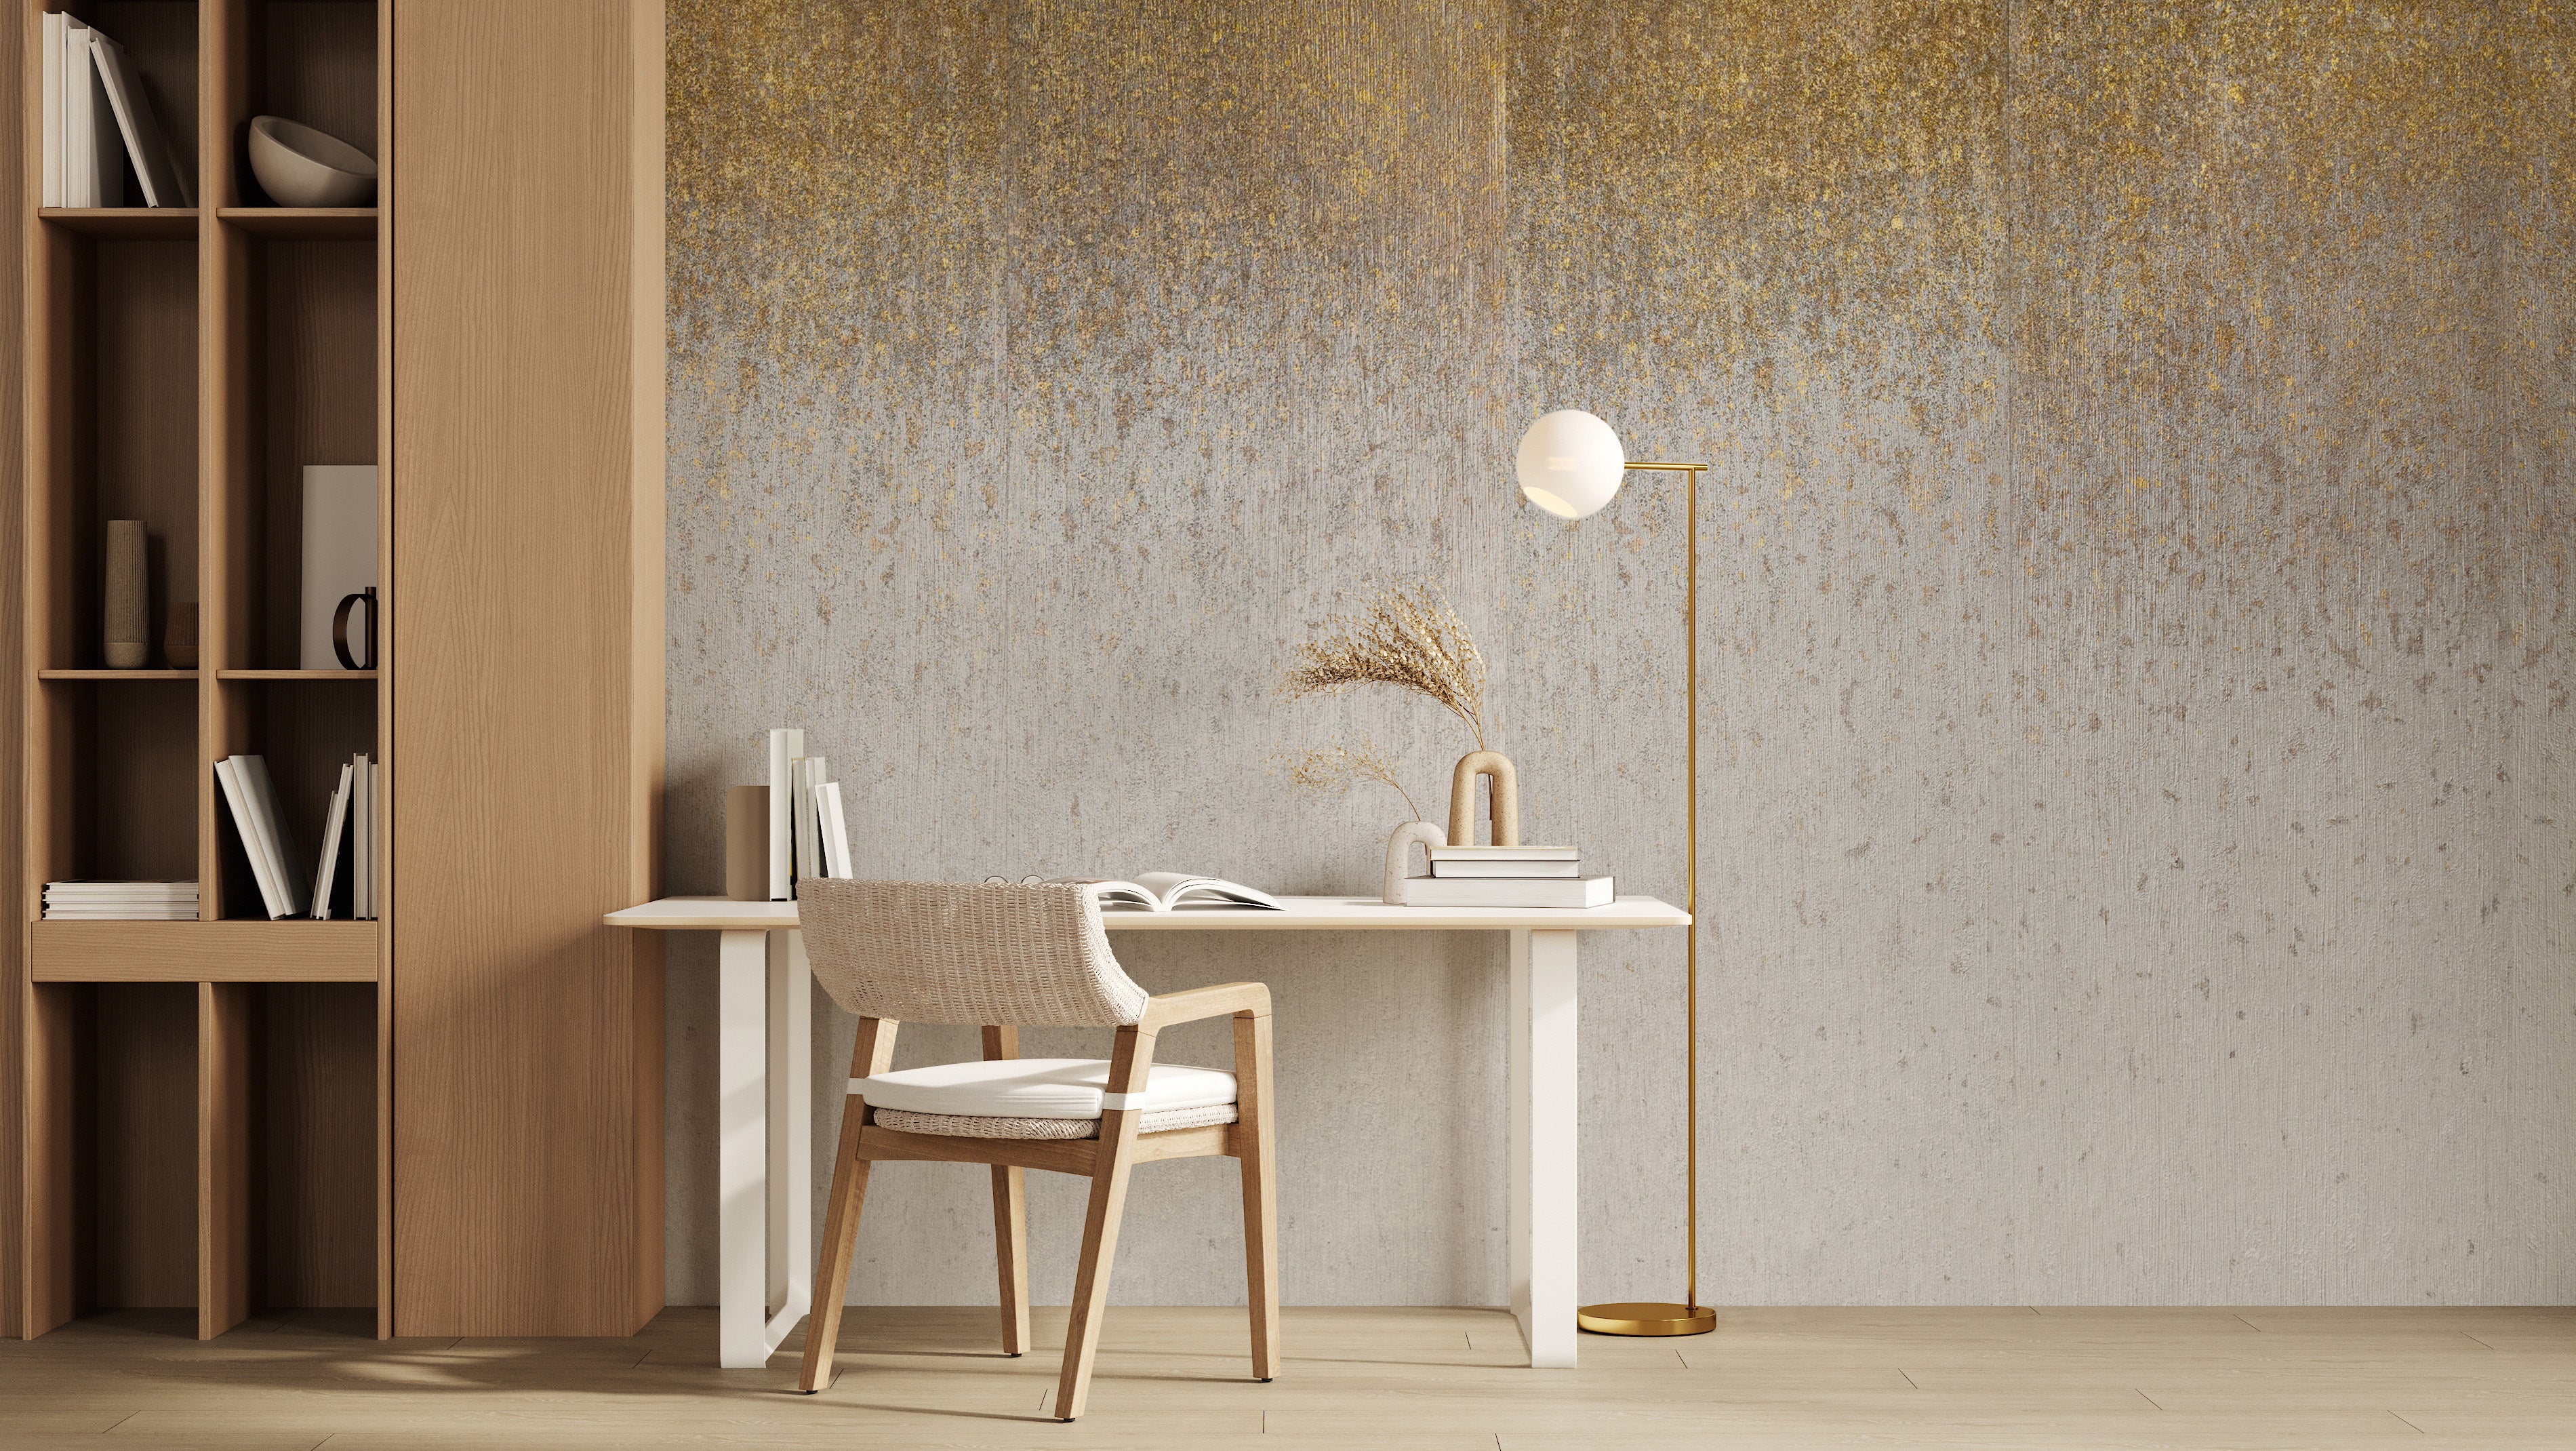 How to Select Hand-Painted Wallpaper for Interior Design